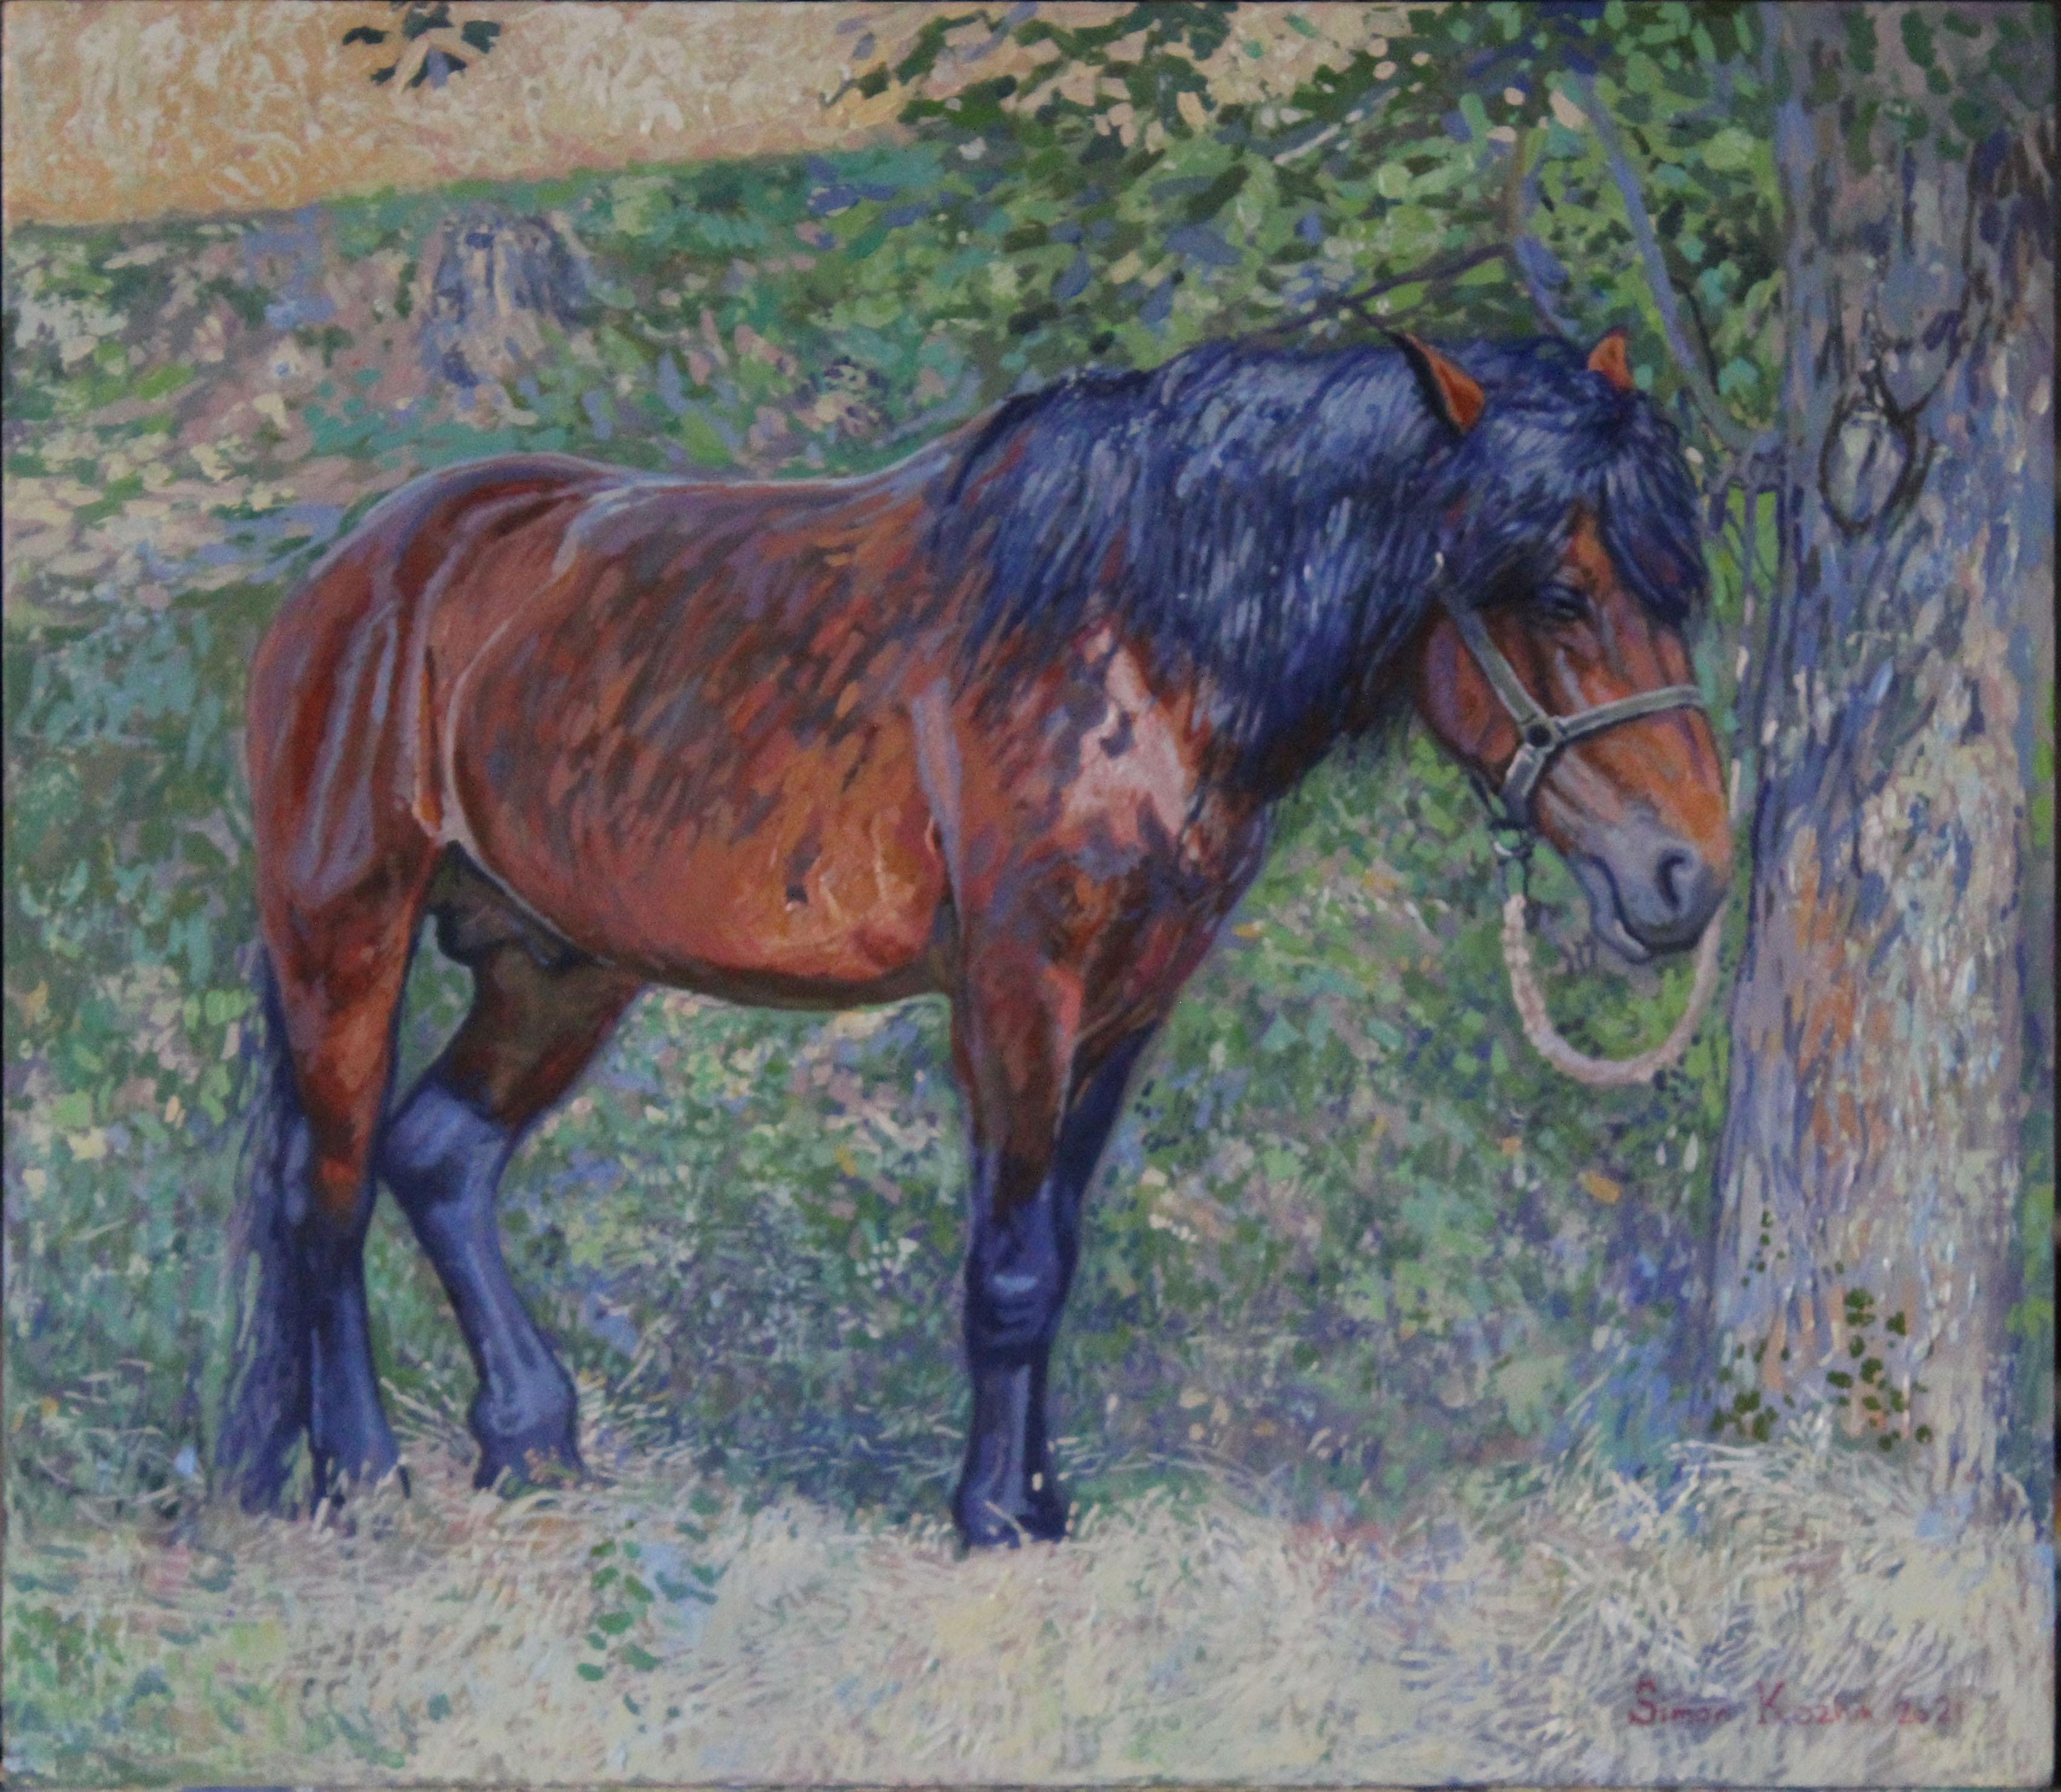 Horse in the shade of trees - Painting by Simon Kozhin